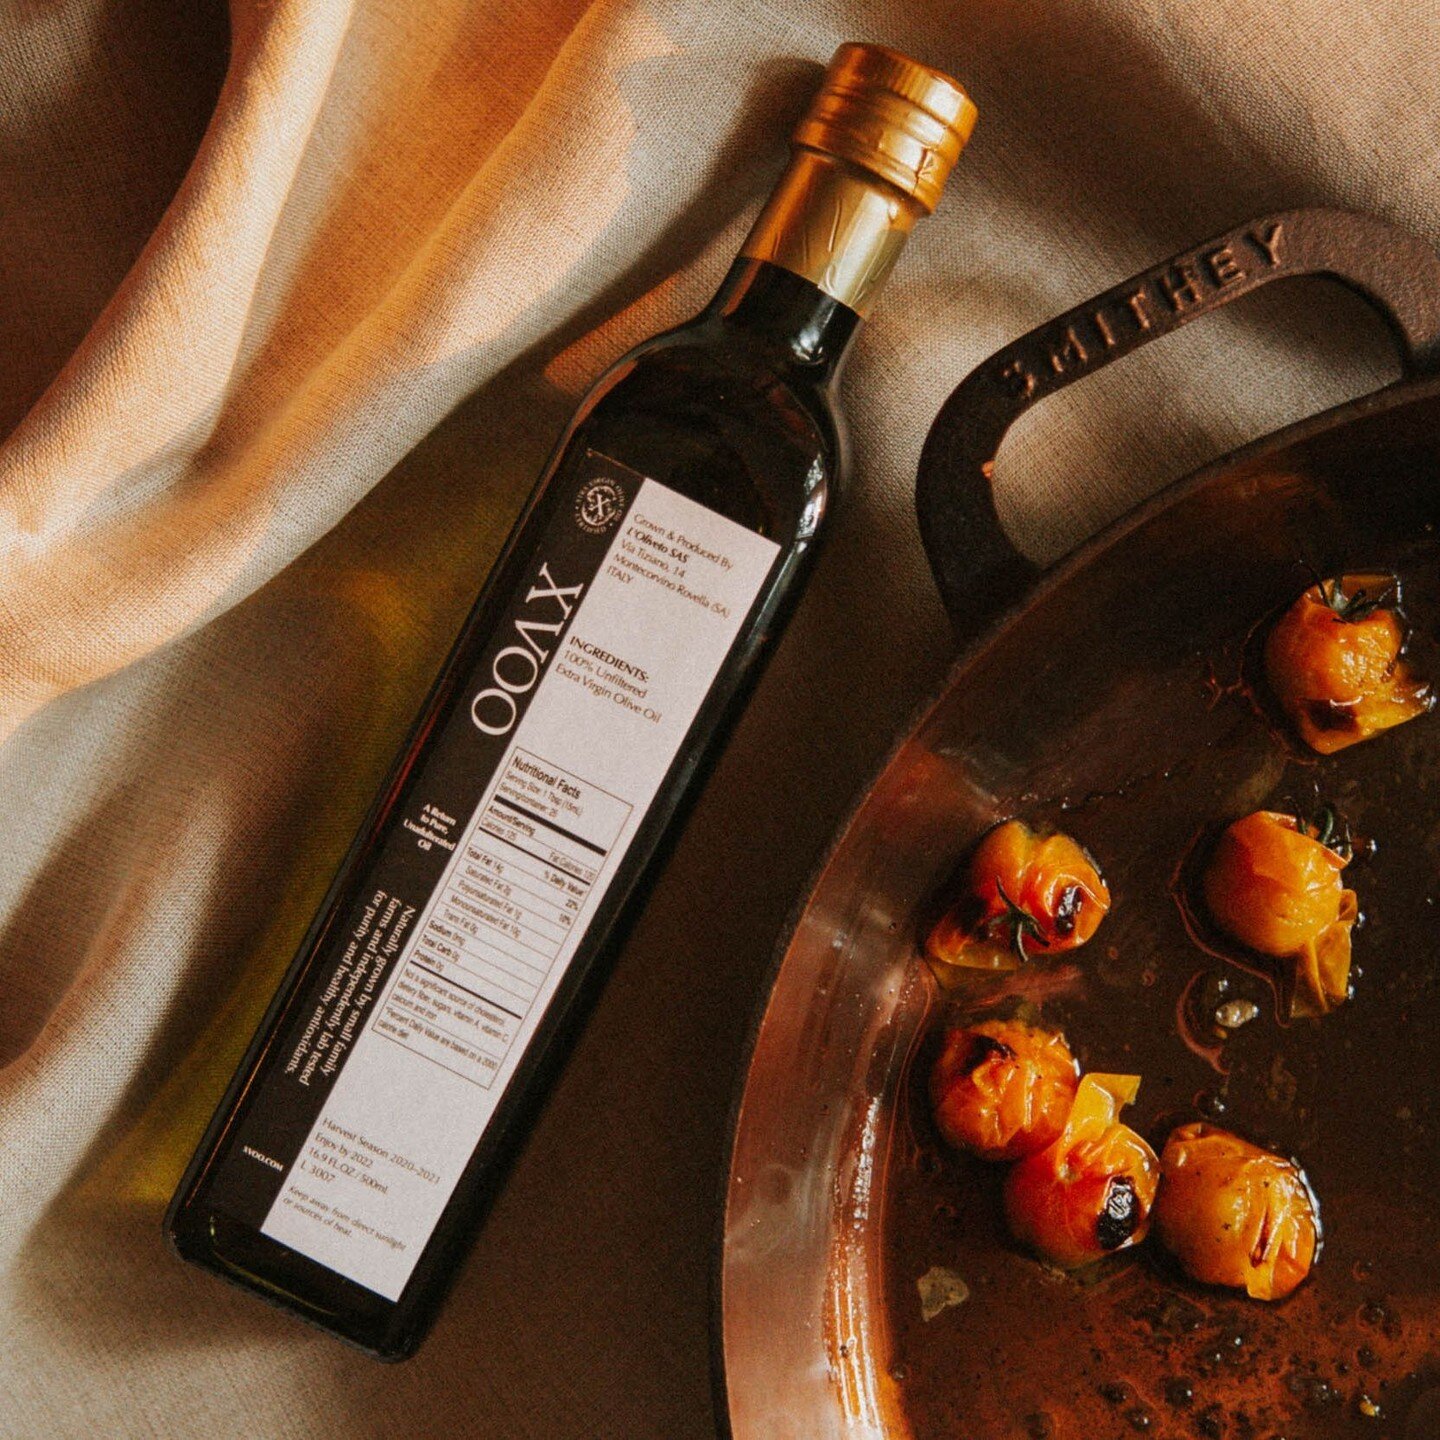 Cooking with high quality Extra Virgin Olive Oil elevates every ingredient it touches. It is unrivaled in its flavor, contains a variety of health benefits and is a kitchen staple that remains exciting and luxurious.⠀
⠀
📖 Read more about cooking wit